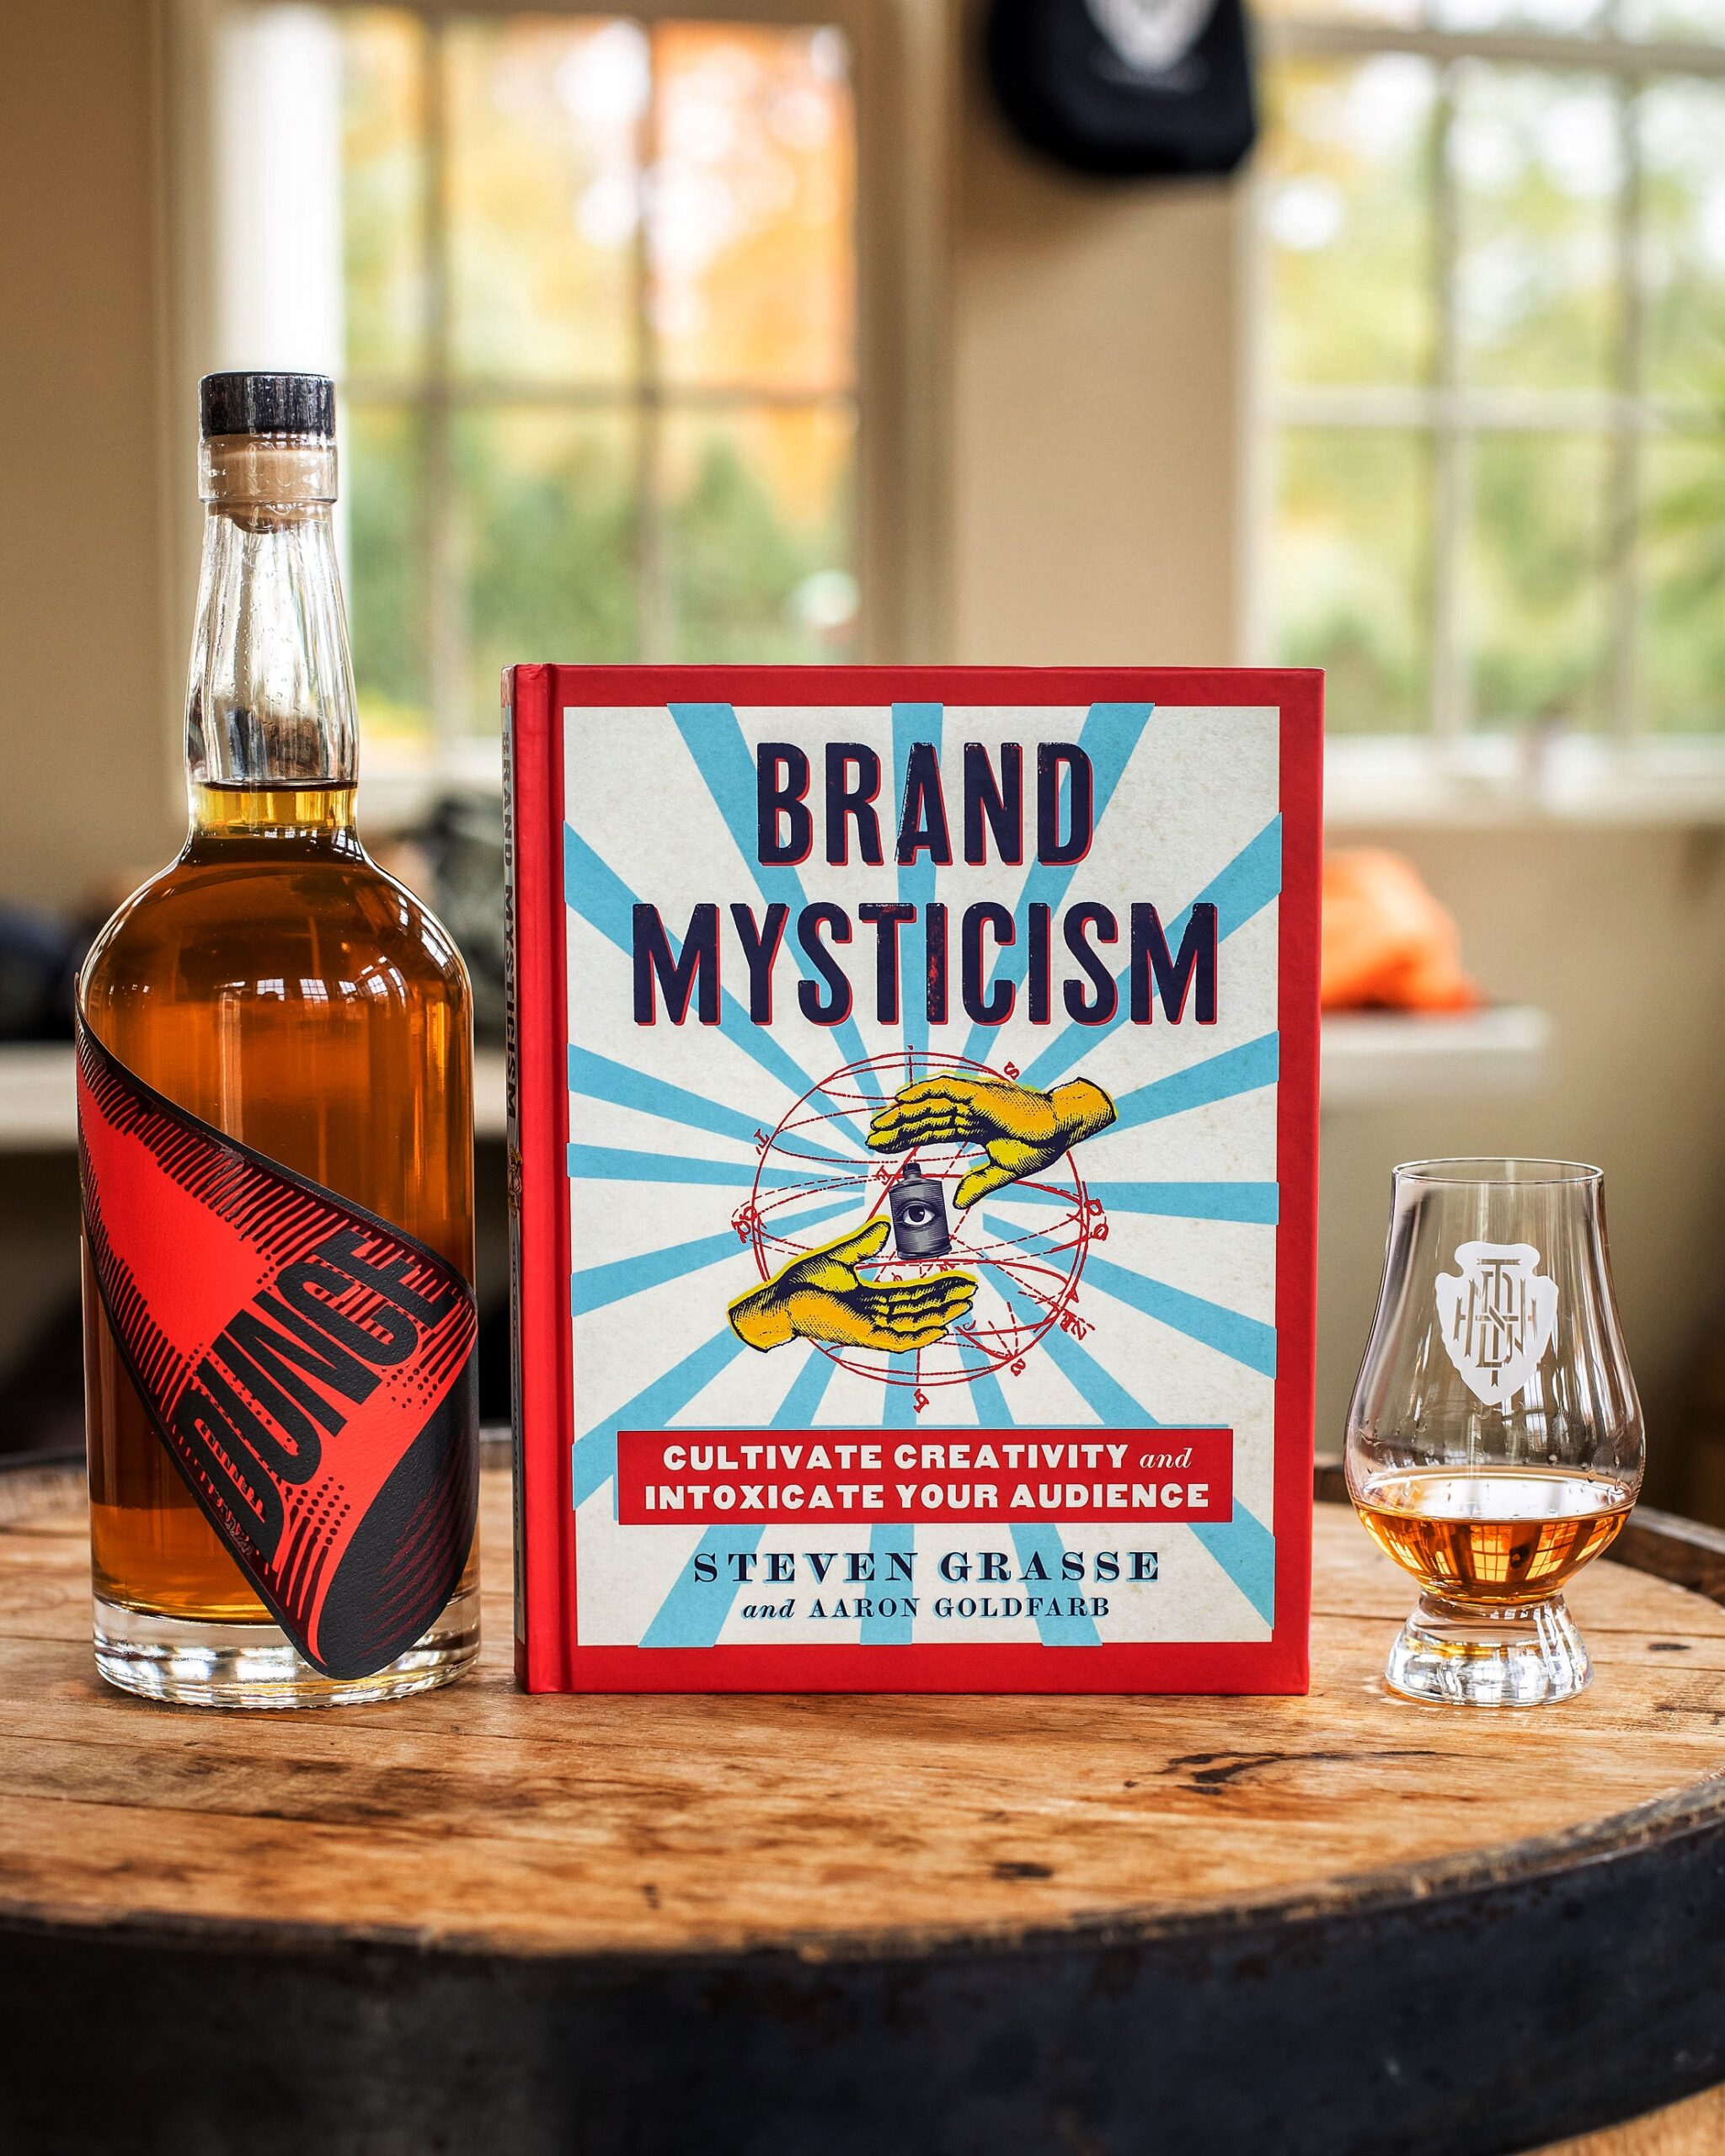 198: Building “Brand Mysticism” – How to Launch a Viral Booze Brand